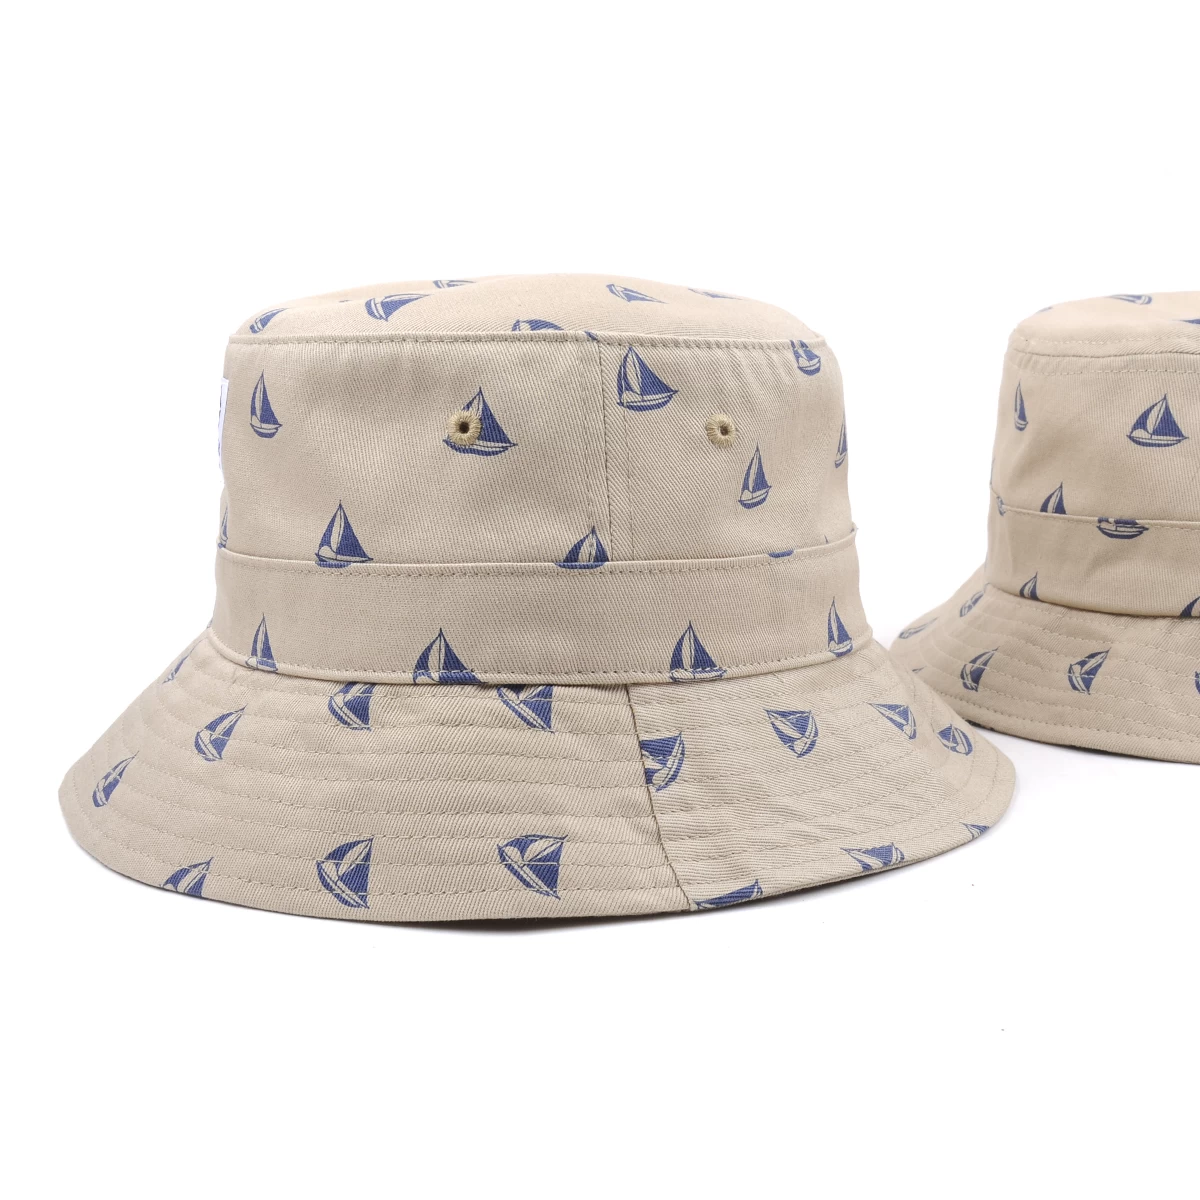 Velcro closure floral bucket hat China Supplier